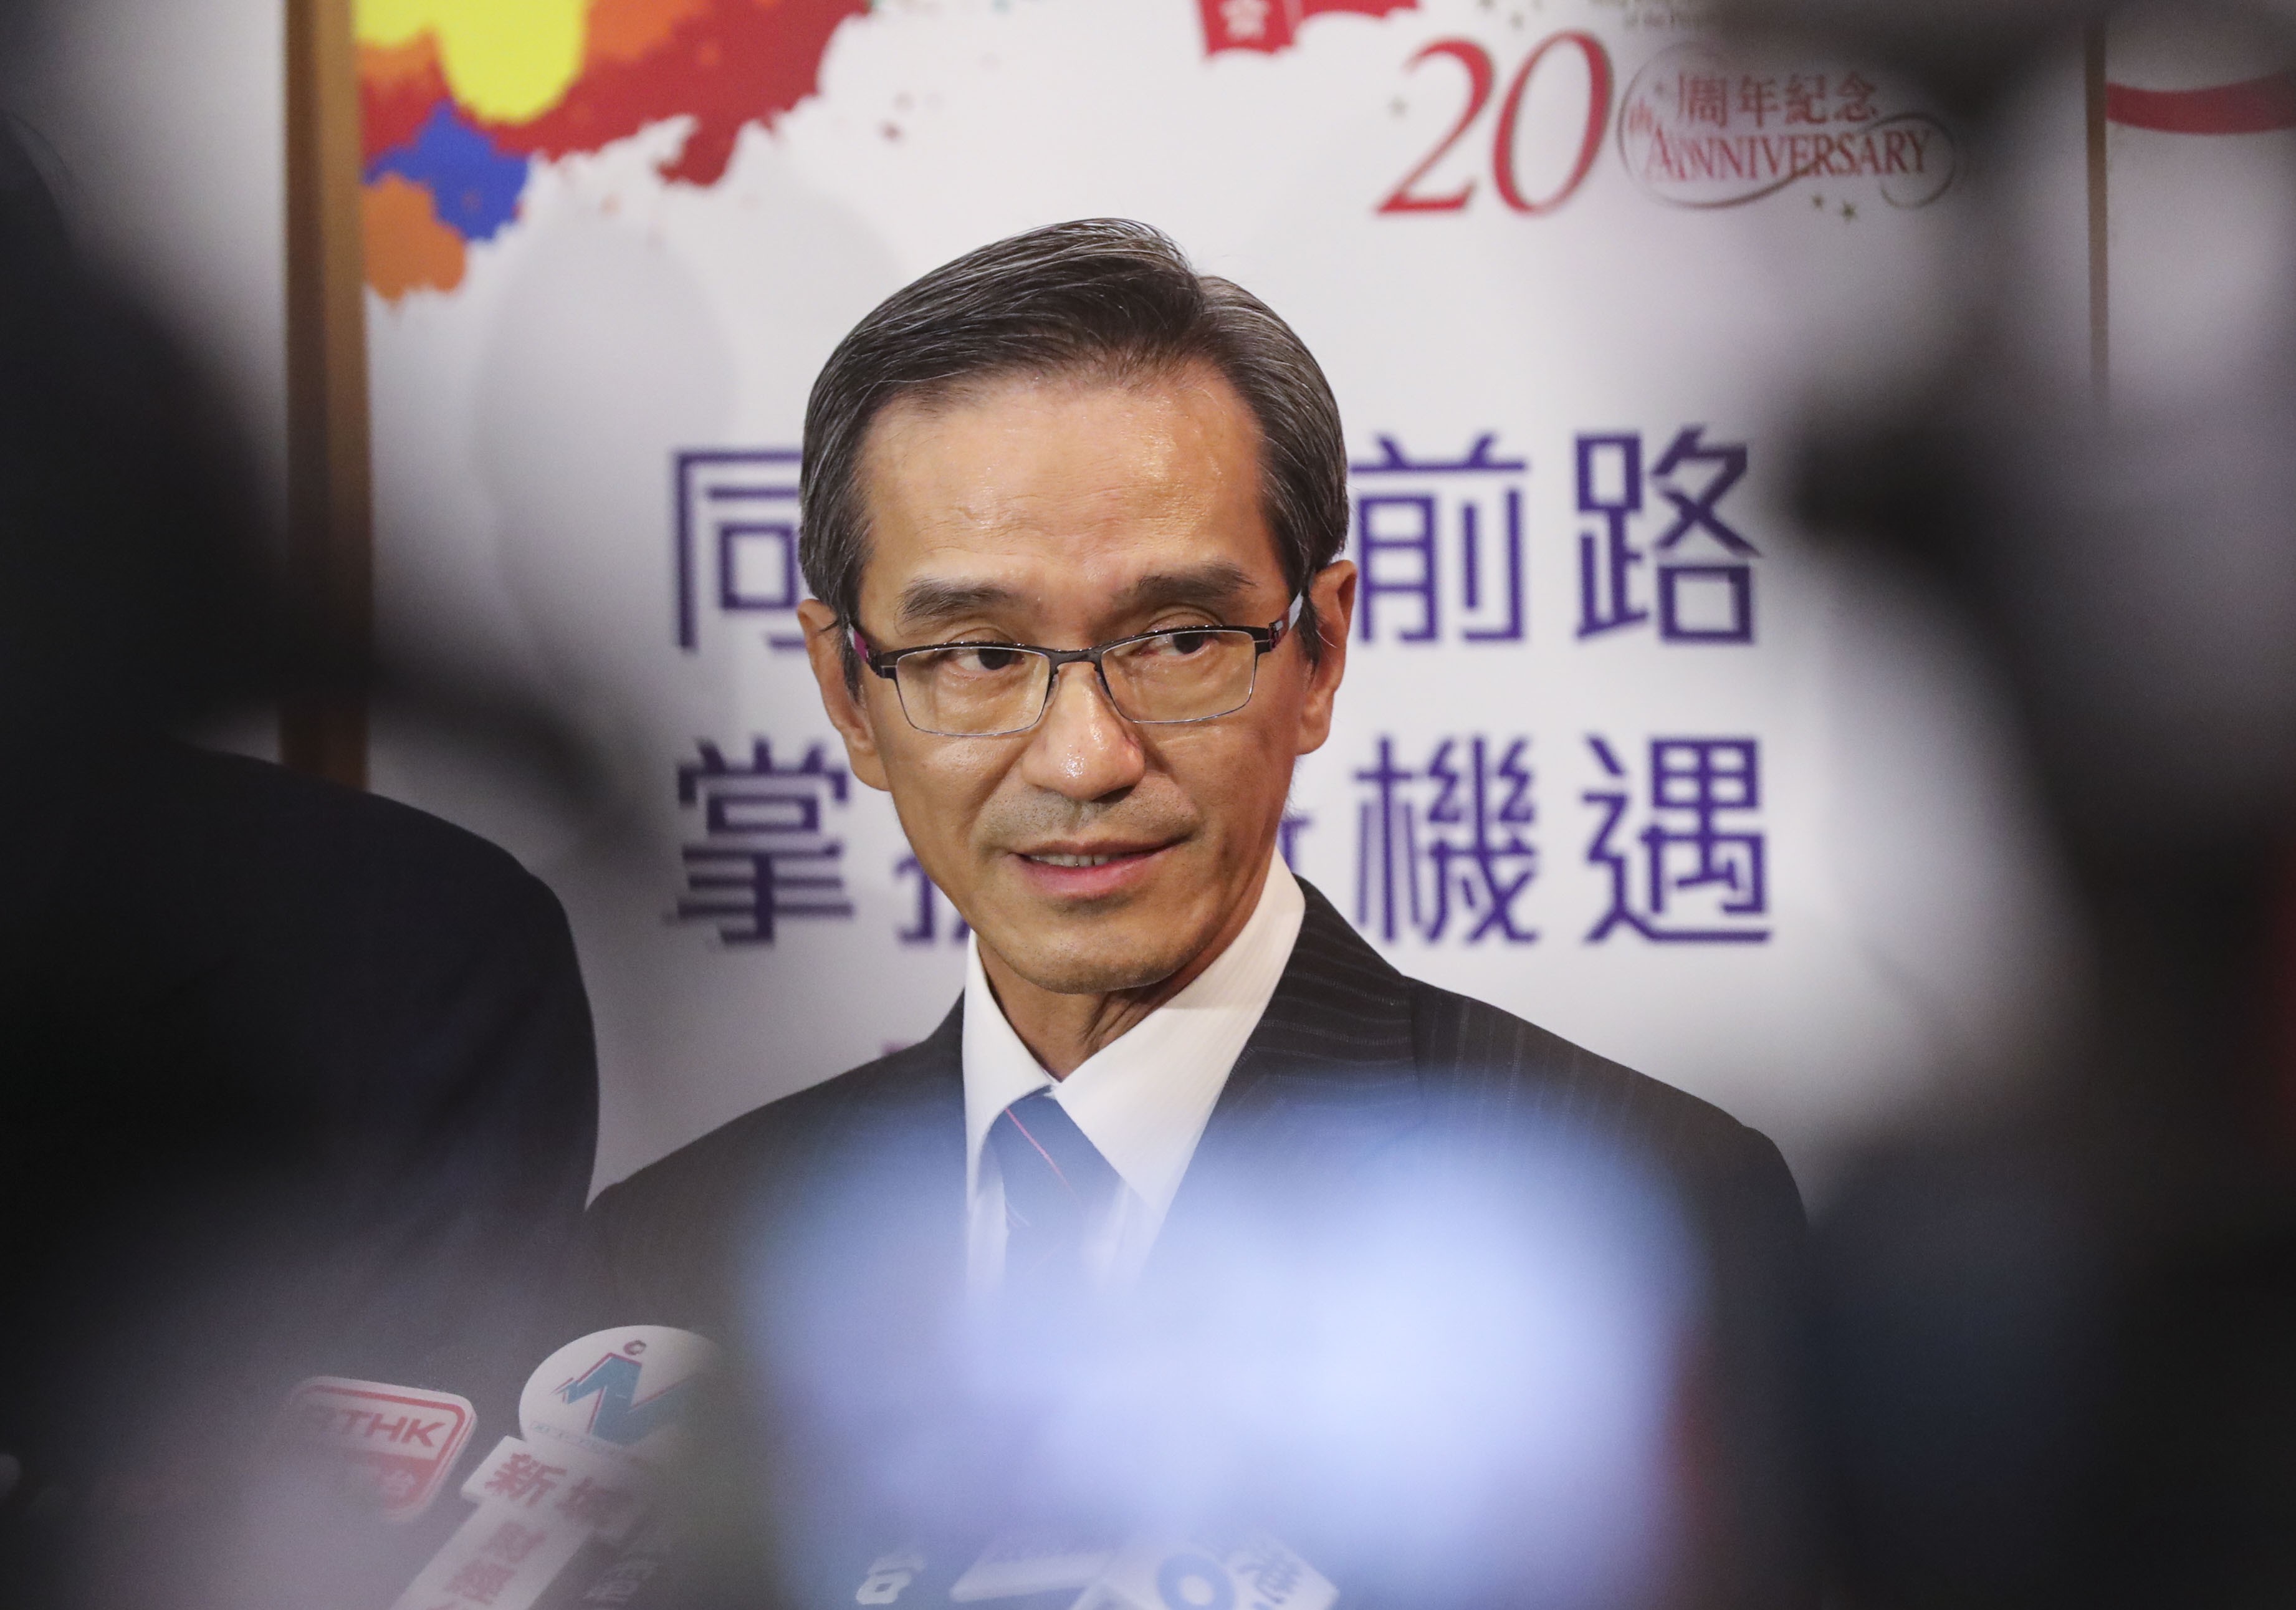 Stanley Wong Yuen-fai’s comments were ‘in serious conflict’ with his other role as head of the city’s environmental impact watchdog, the groups say, but Wong  says he based comments on preliminary studies conducted by the government